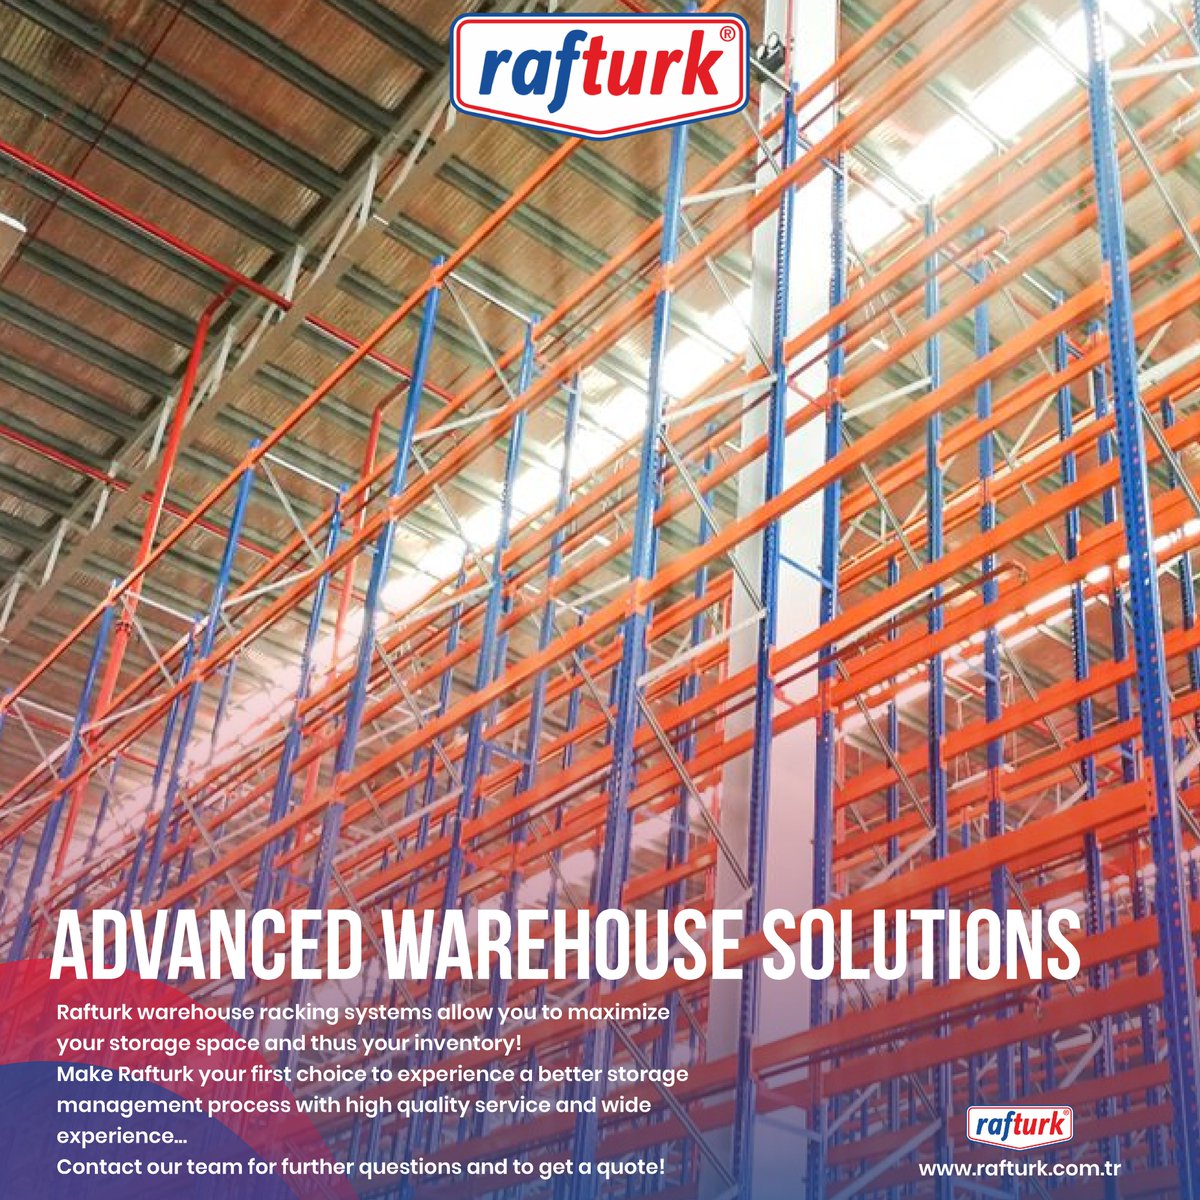 ✔️ Make Rafturk your first choice to experience a better storage management process with high quality warehouse racking systems!

🌍 rafturk.com.tr/en
📧 info@rafturk.com.tr

#advancedwarehousesolutions #heavydutyracking #warehousemanagement #logistics #storage #racking